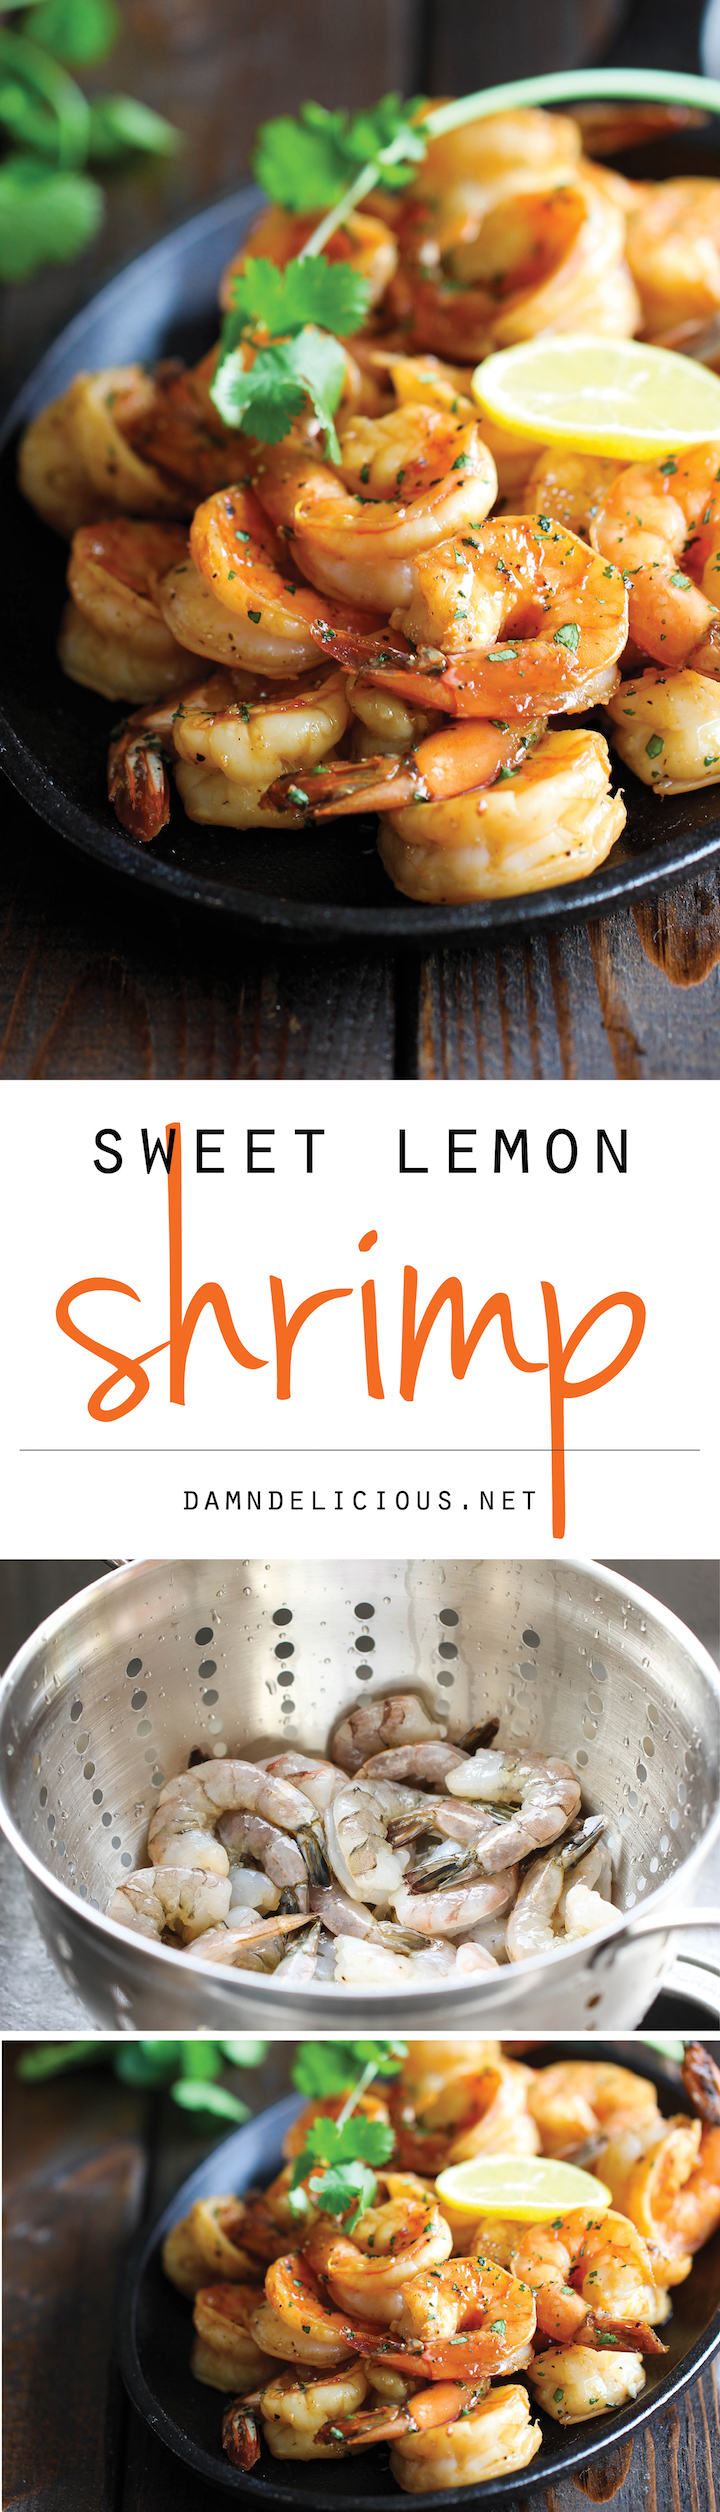 Sweet Lemon Shrimp - The easiest, most simple and flavorful shrimp marinated in a sweet and tangy lemon sauce that everyone will love!